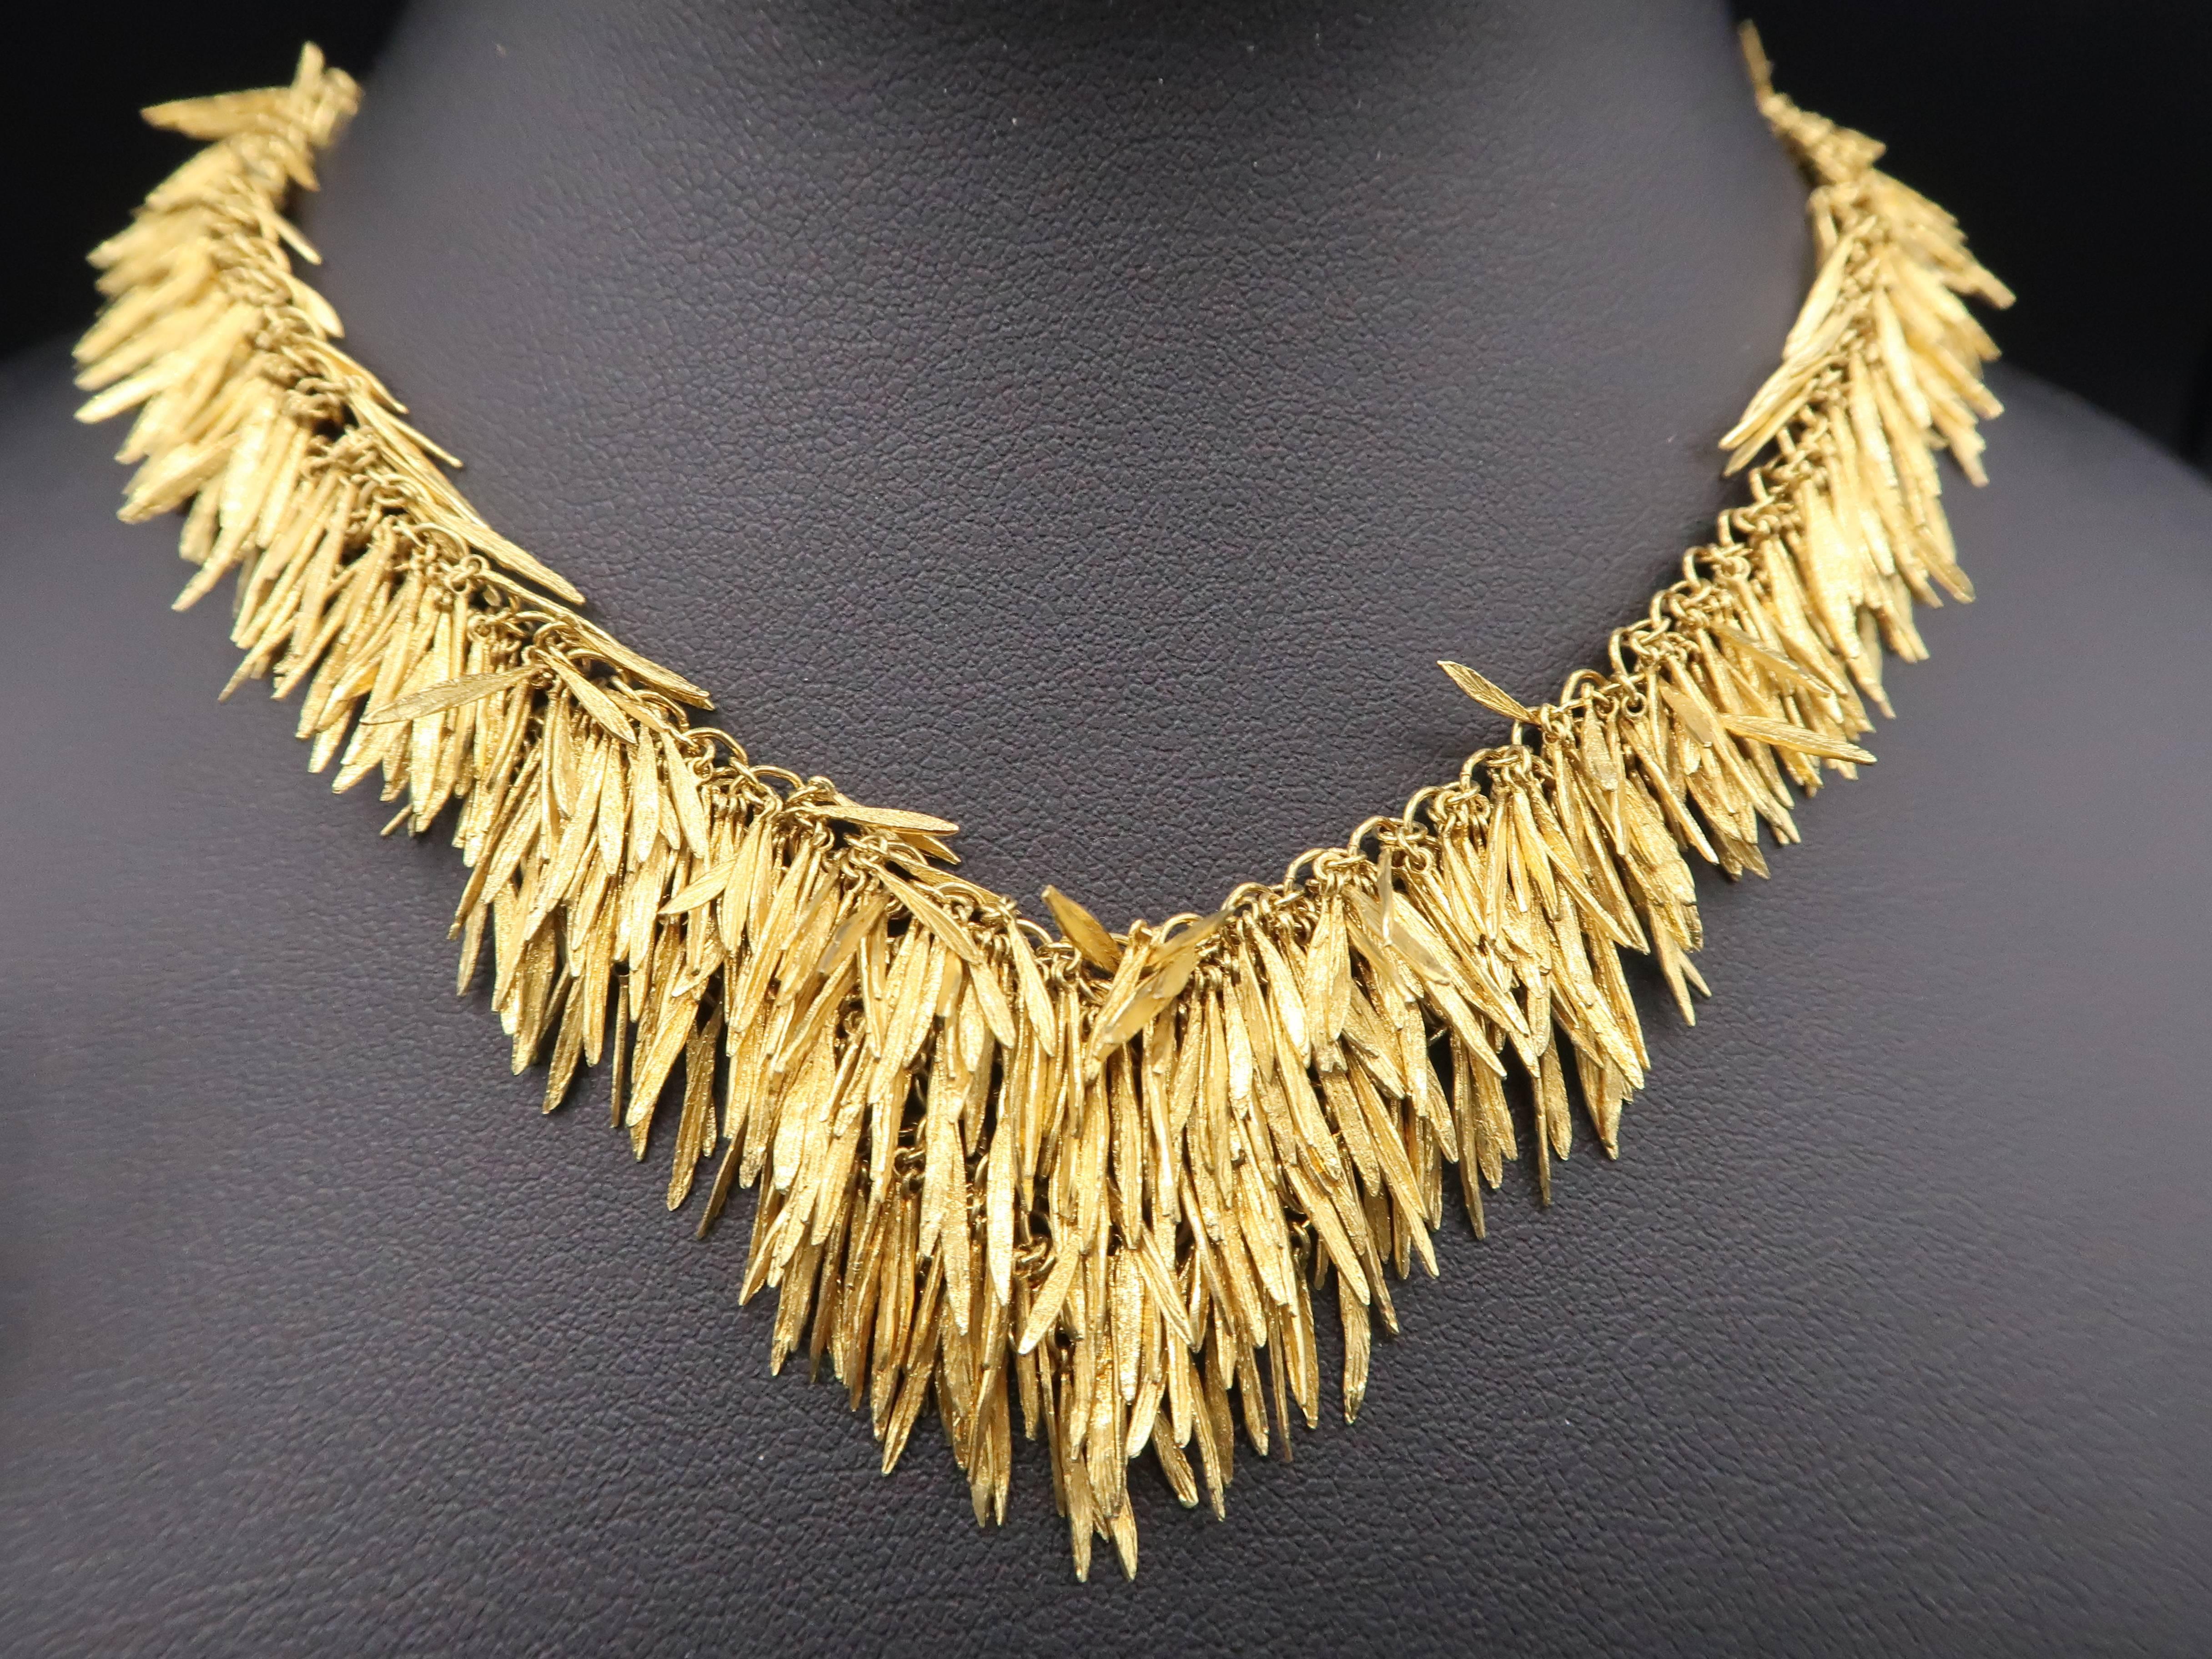 Brilliant Cut H. Stern Feathers Brushed Gold Necklace and Earrings with Diamond For Sale